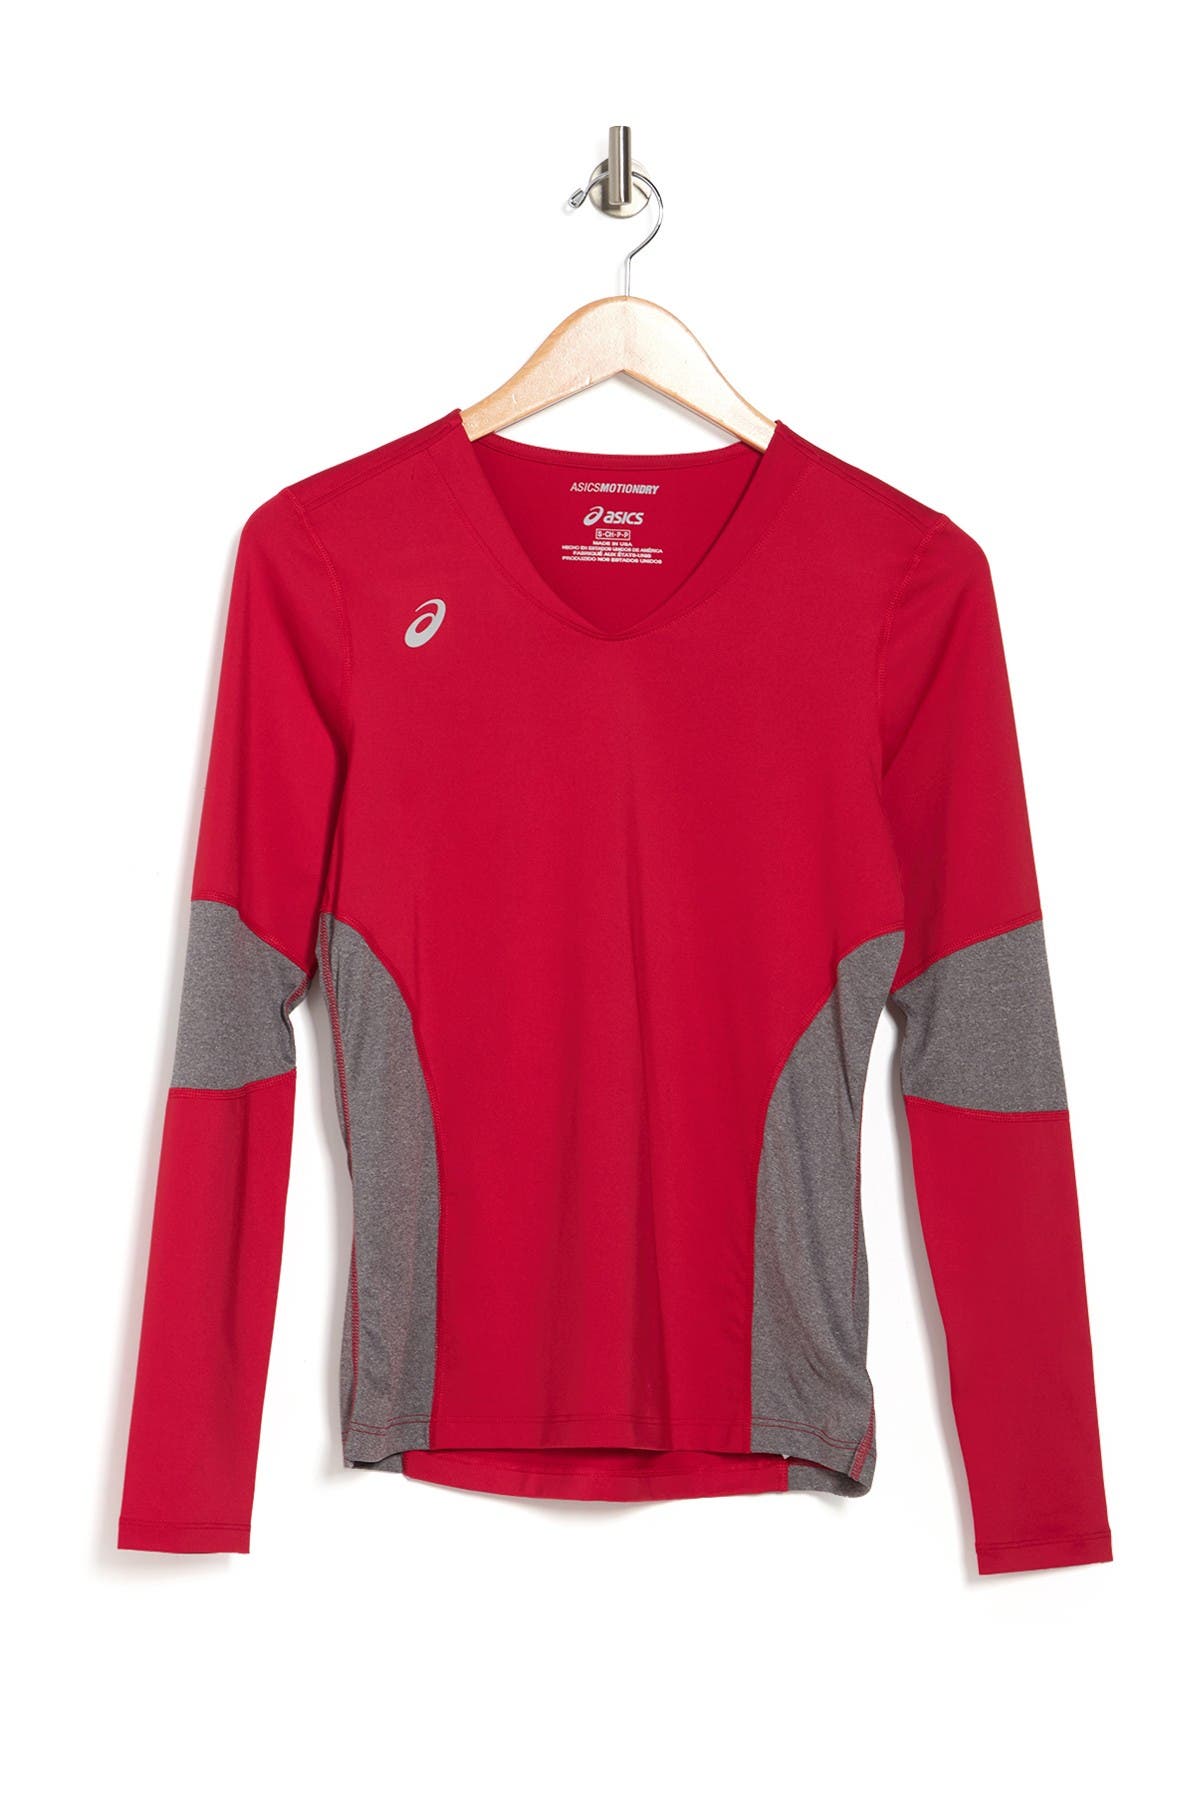 Asics Decoy Long Sleeve Jersey In Red/heather Grey